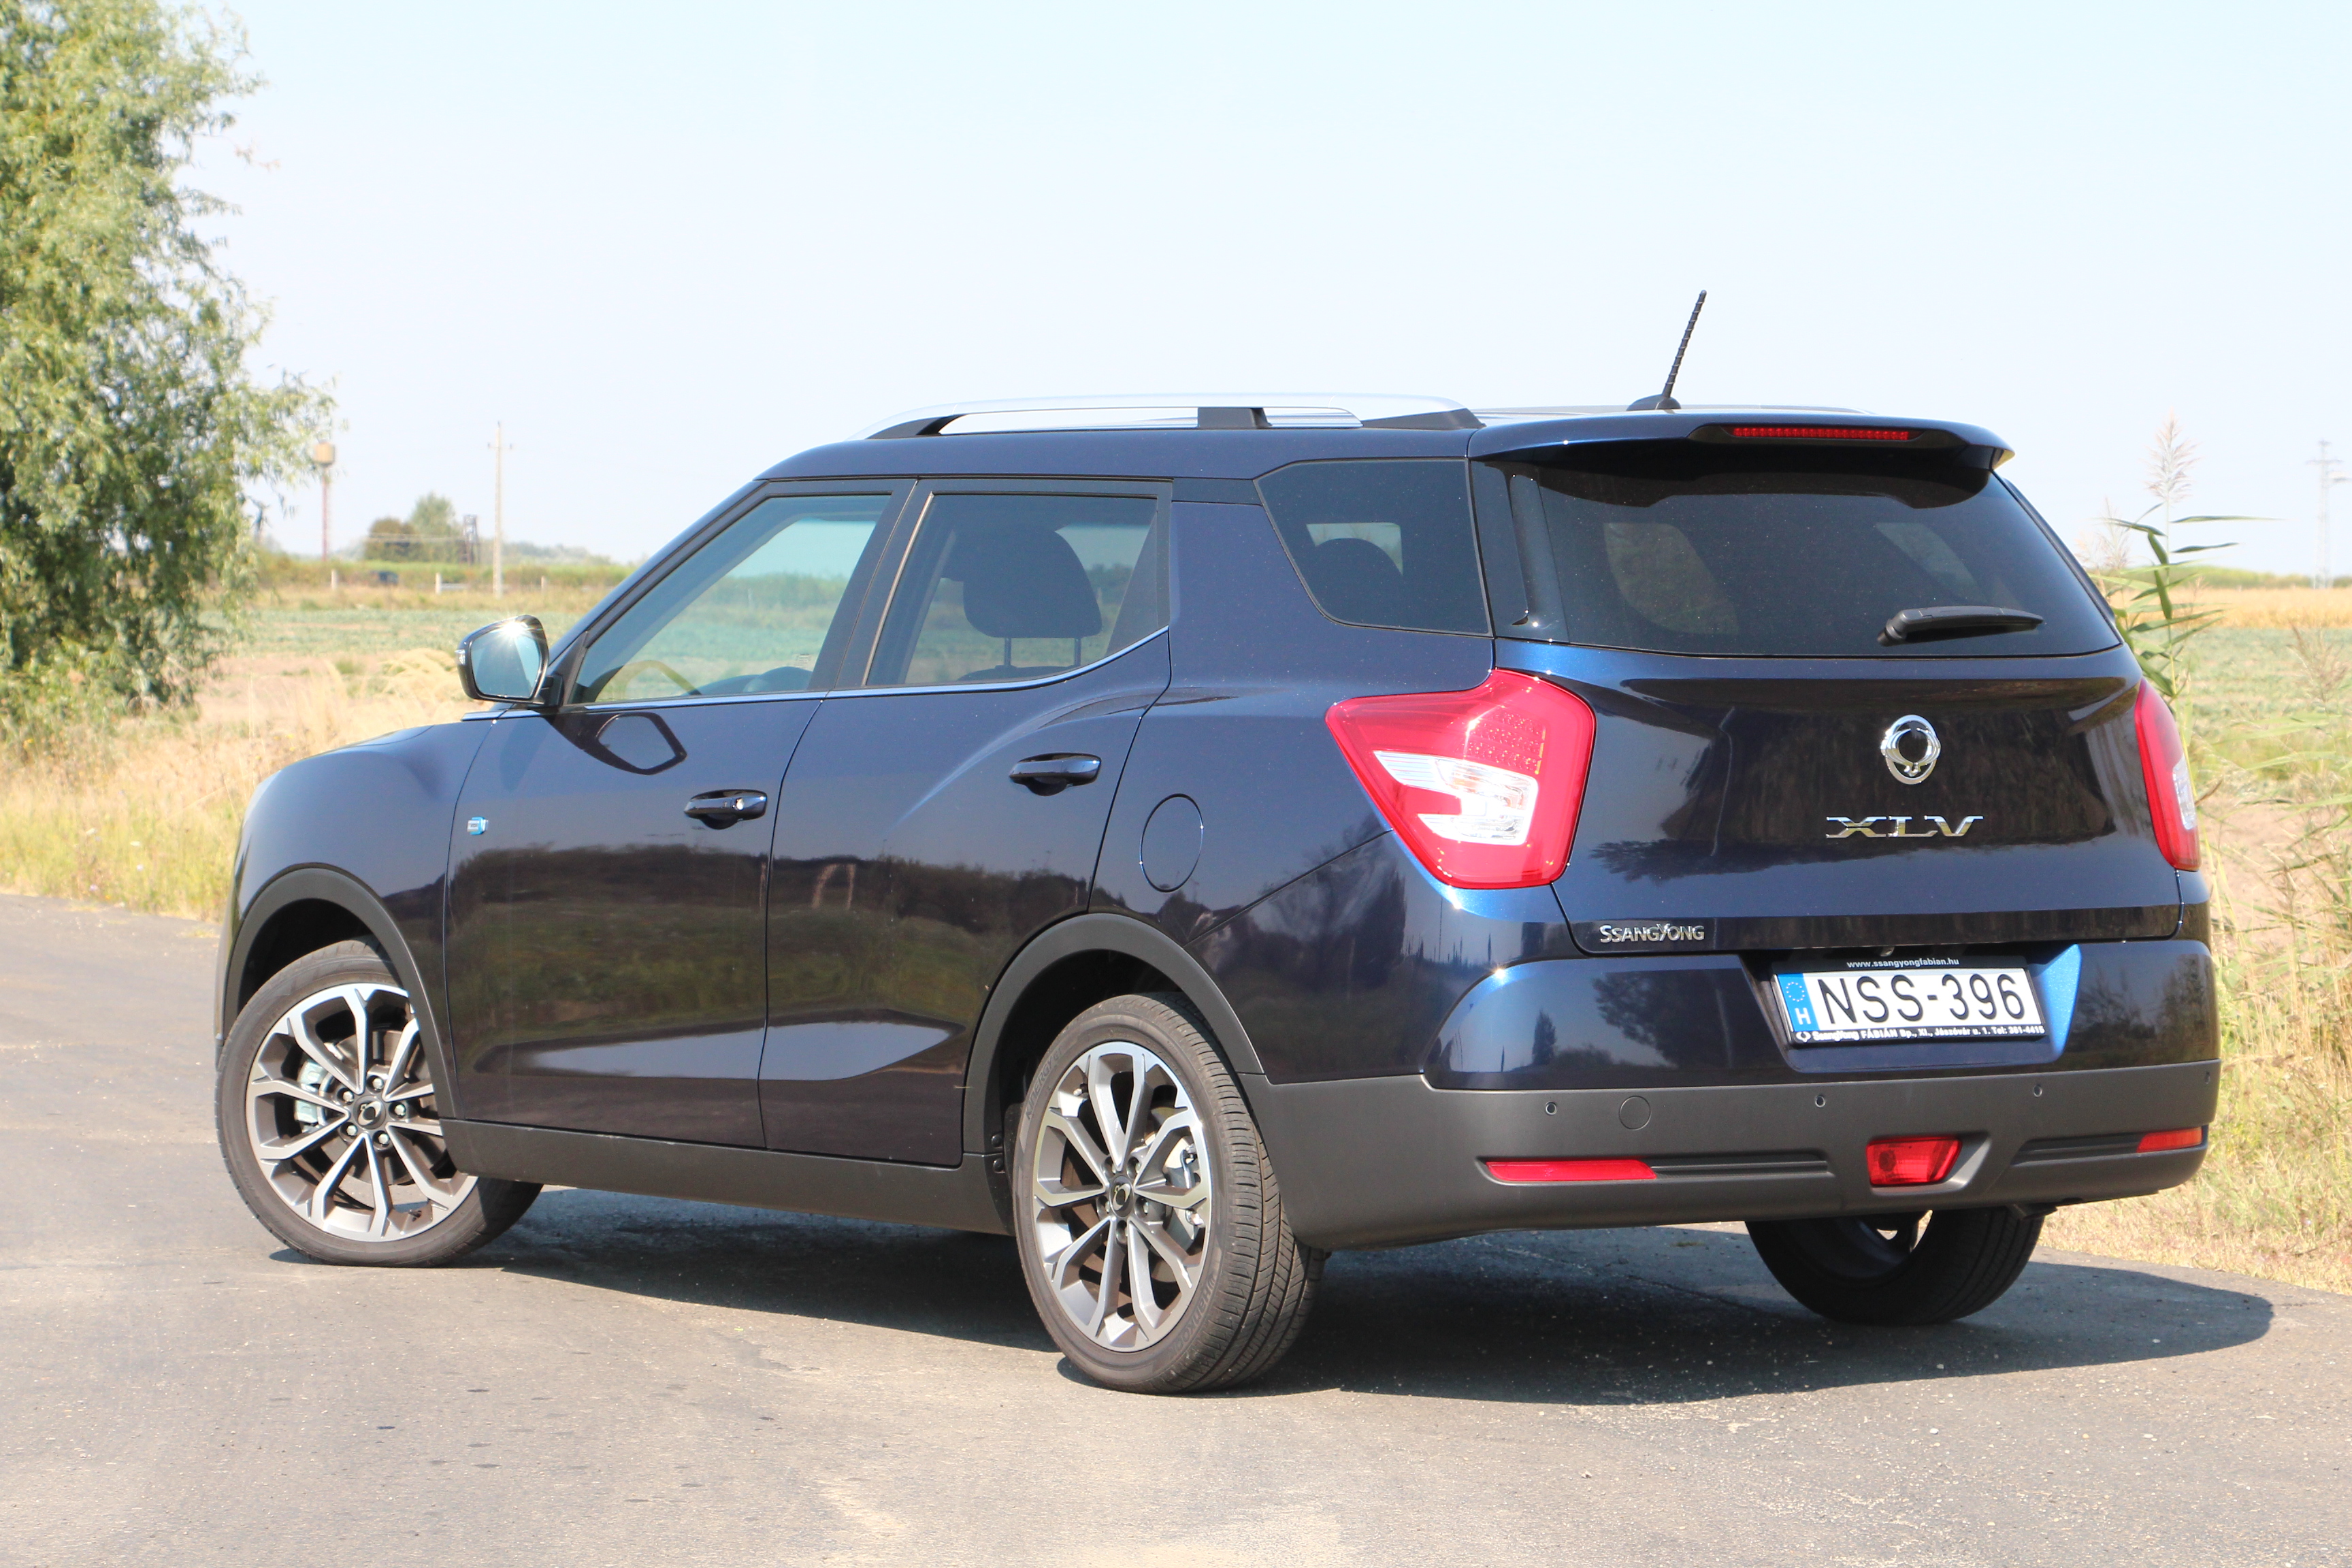 SsangYong XLV best specifications